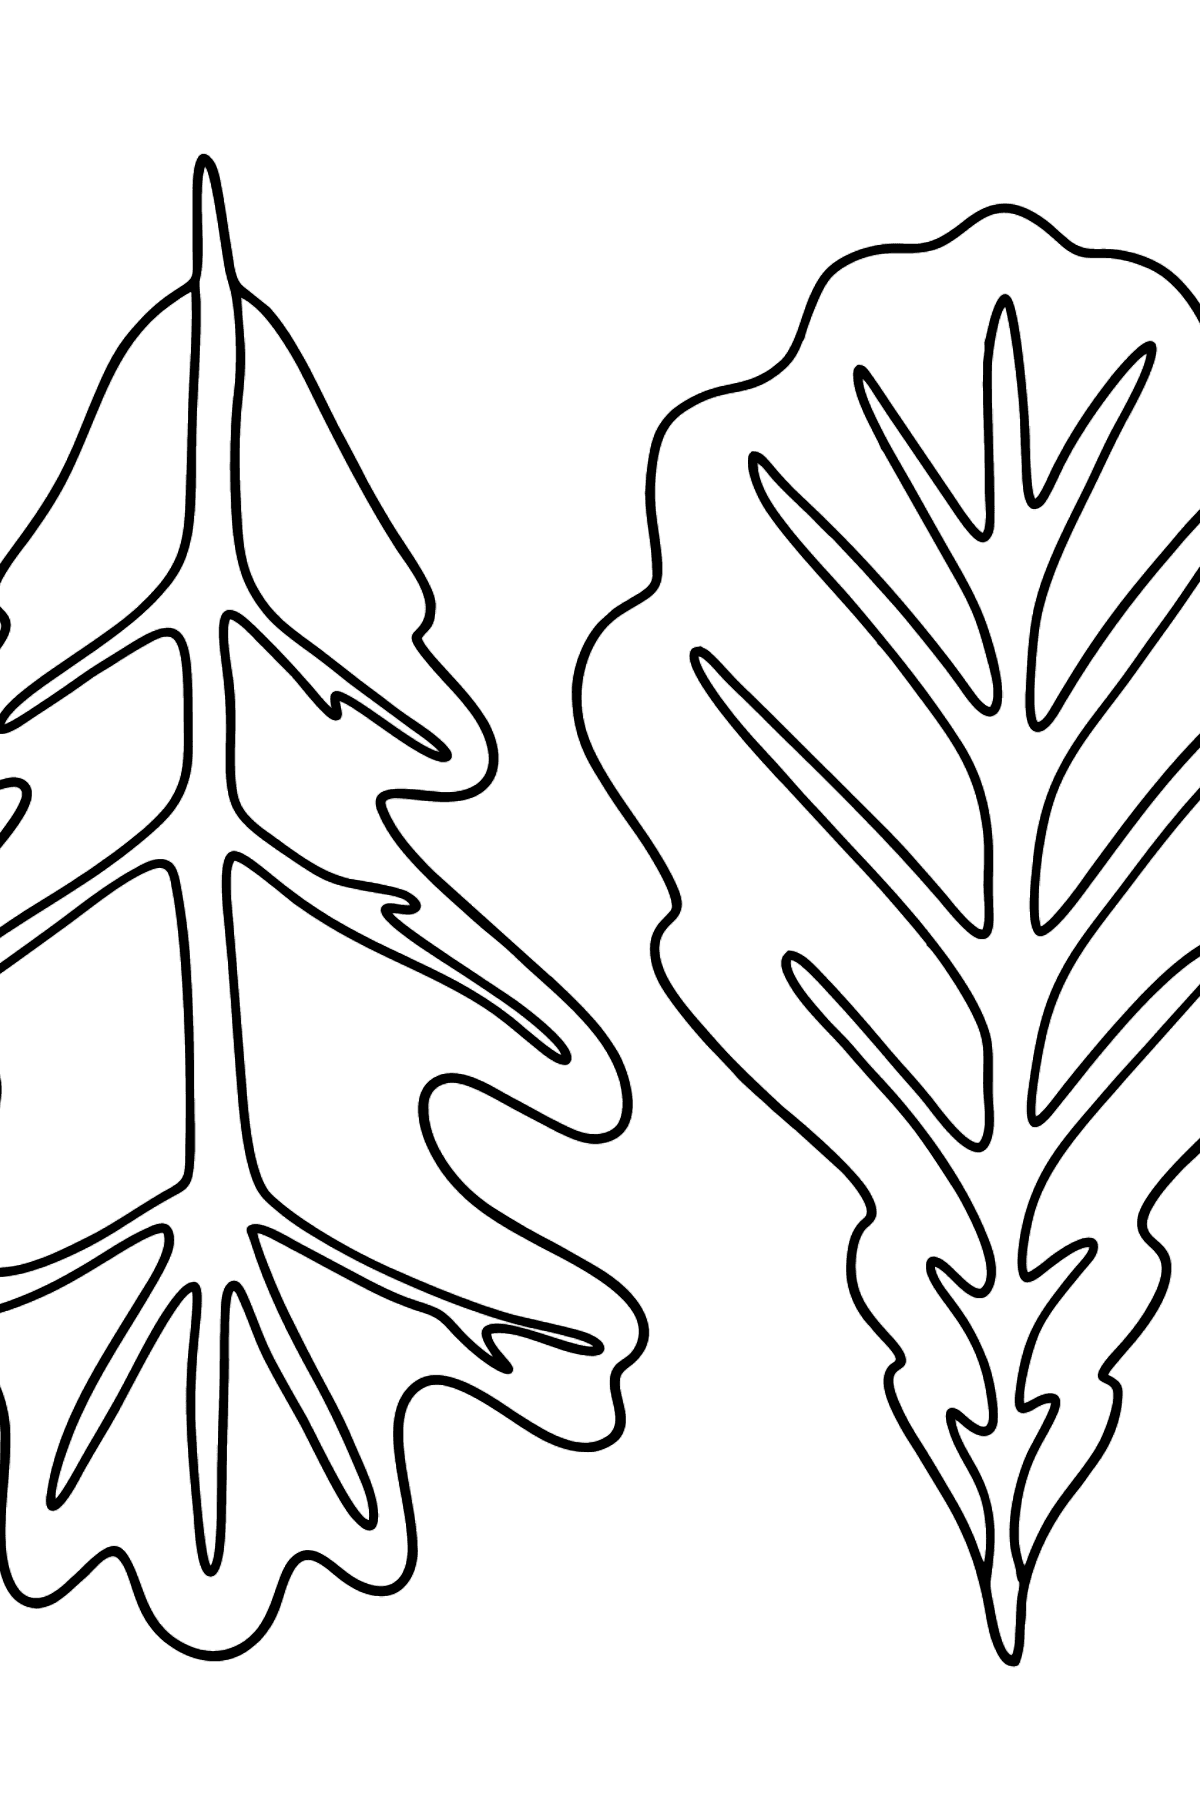 Oak Leaf coloring page - Coloring Pages for Kids